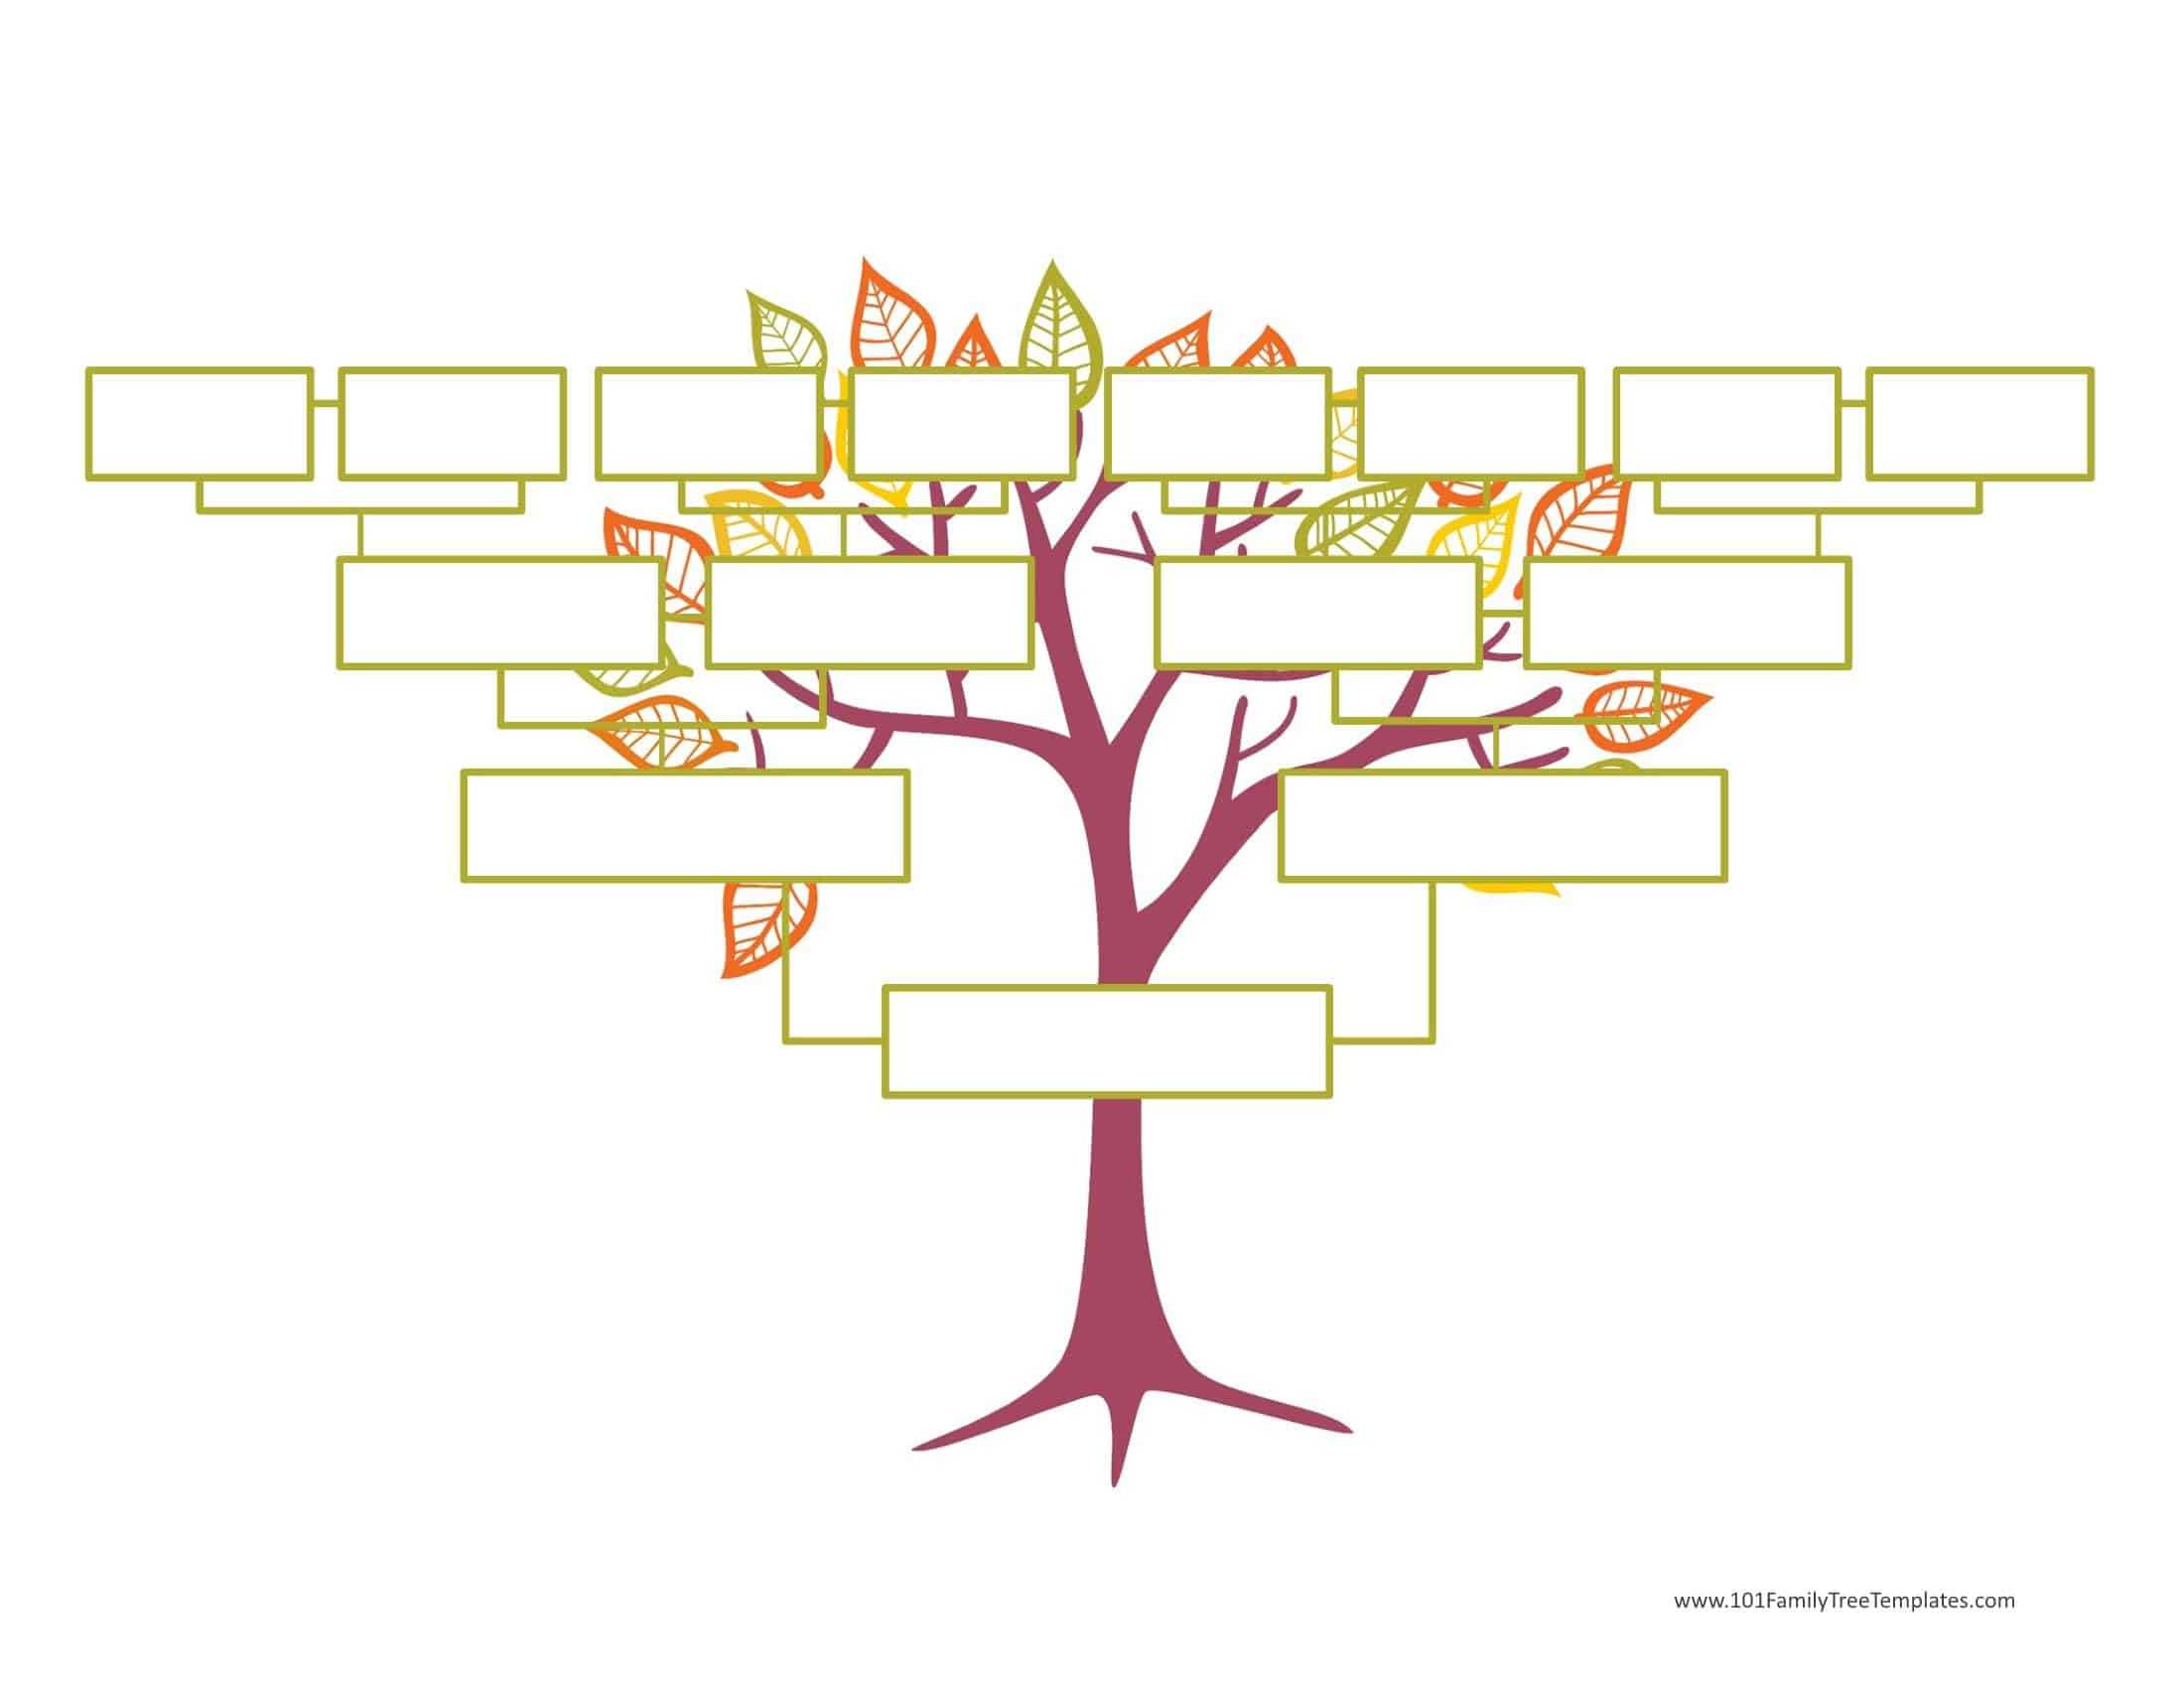 Blank Family Tree Template | Free Instant Download Inside Blank Tree Diagram Template